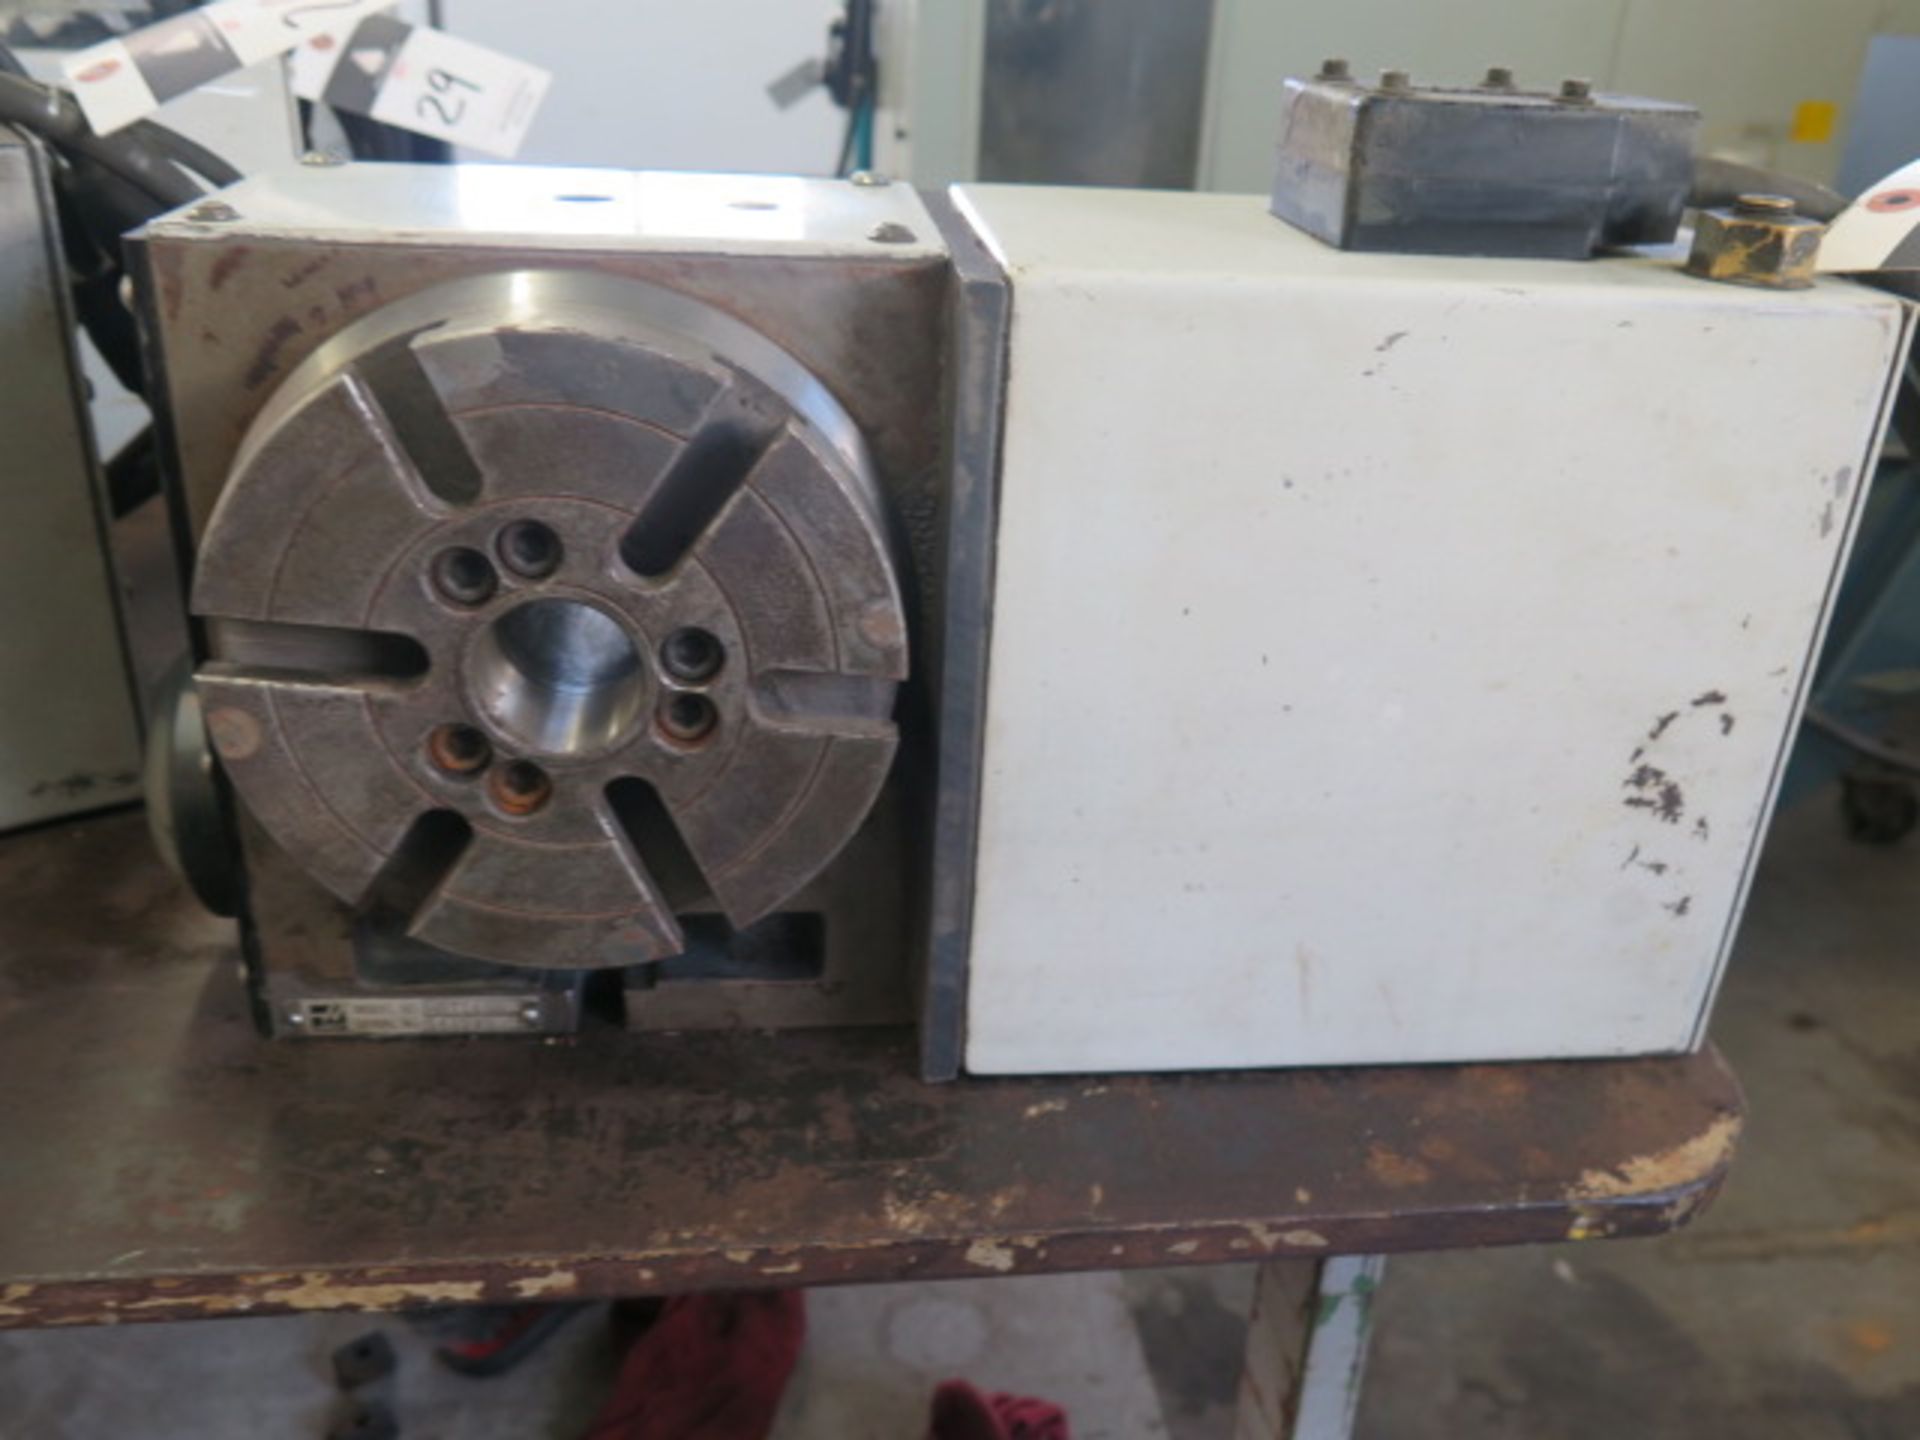 Haas HRT160H 6” 4th Axis Rotary Indexer s/n 163593